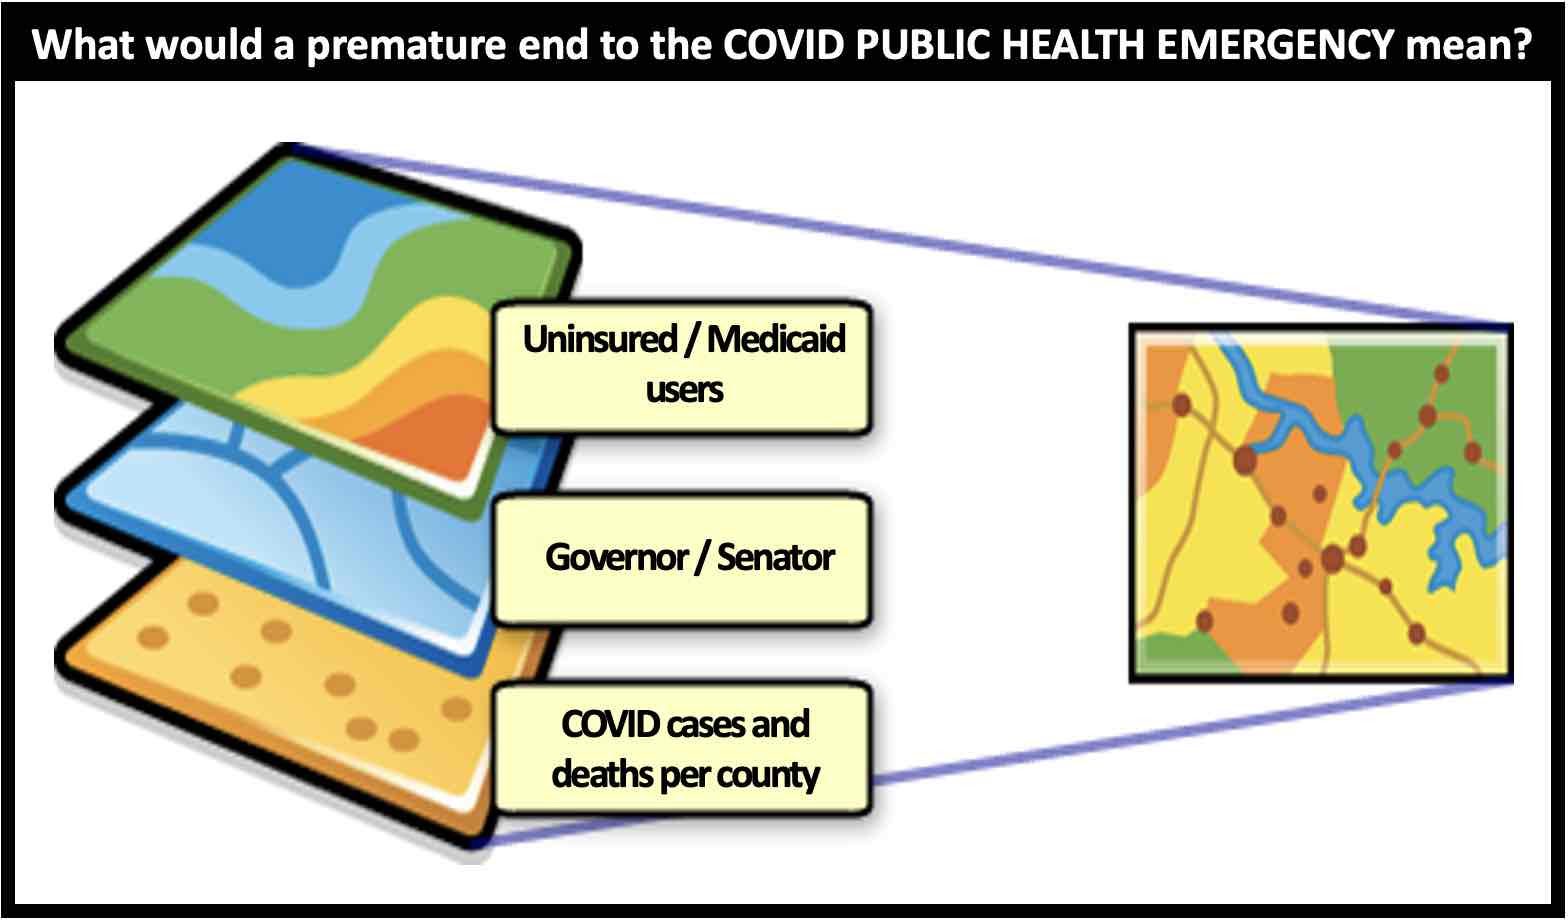 How would prematurely ending the PUBLIC COVID HEALTH EMERGENCY mean to you?